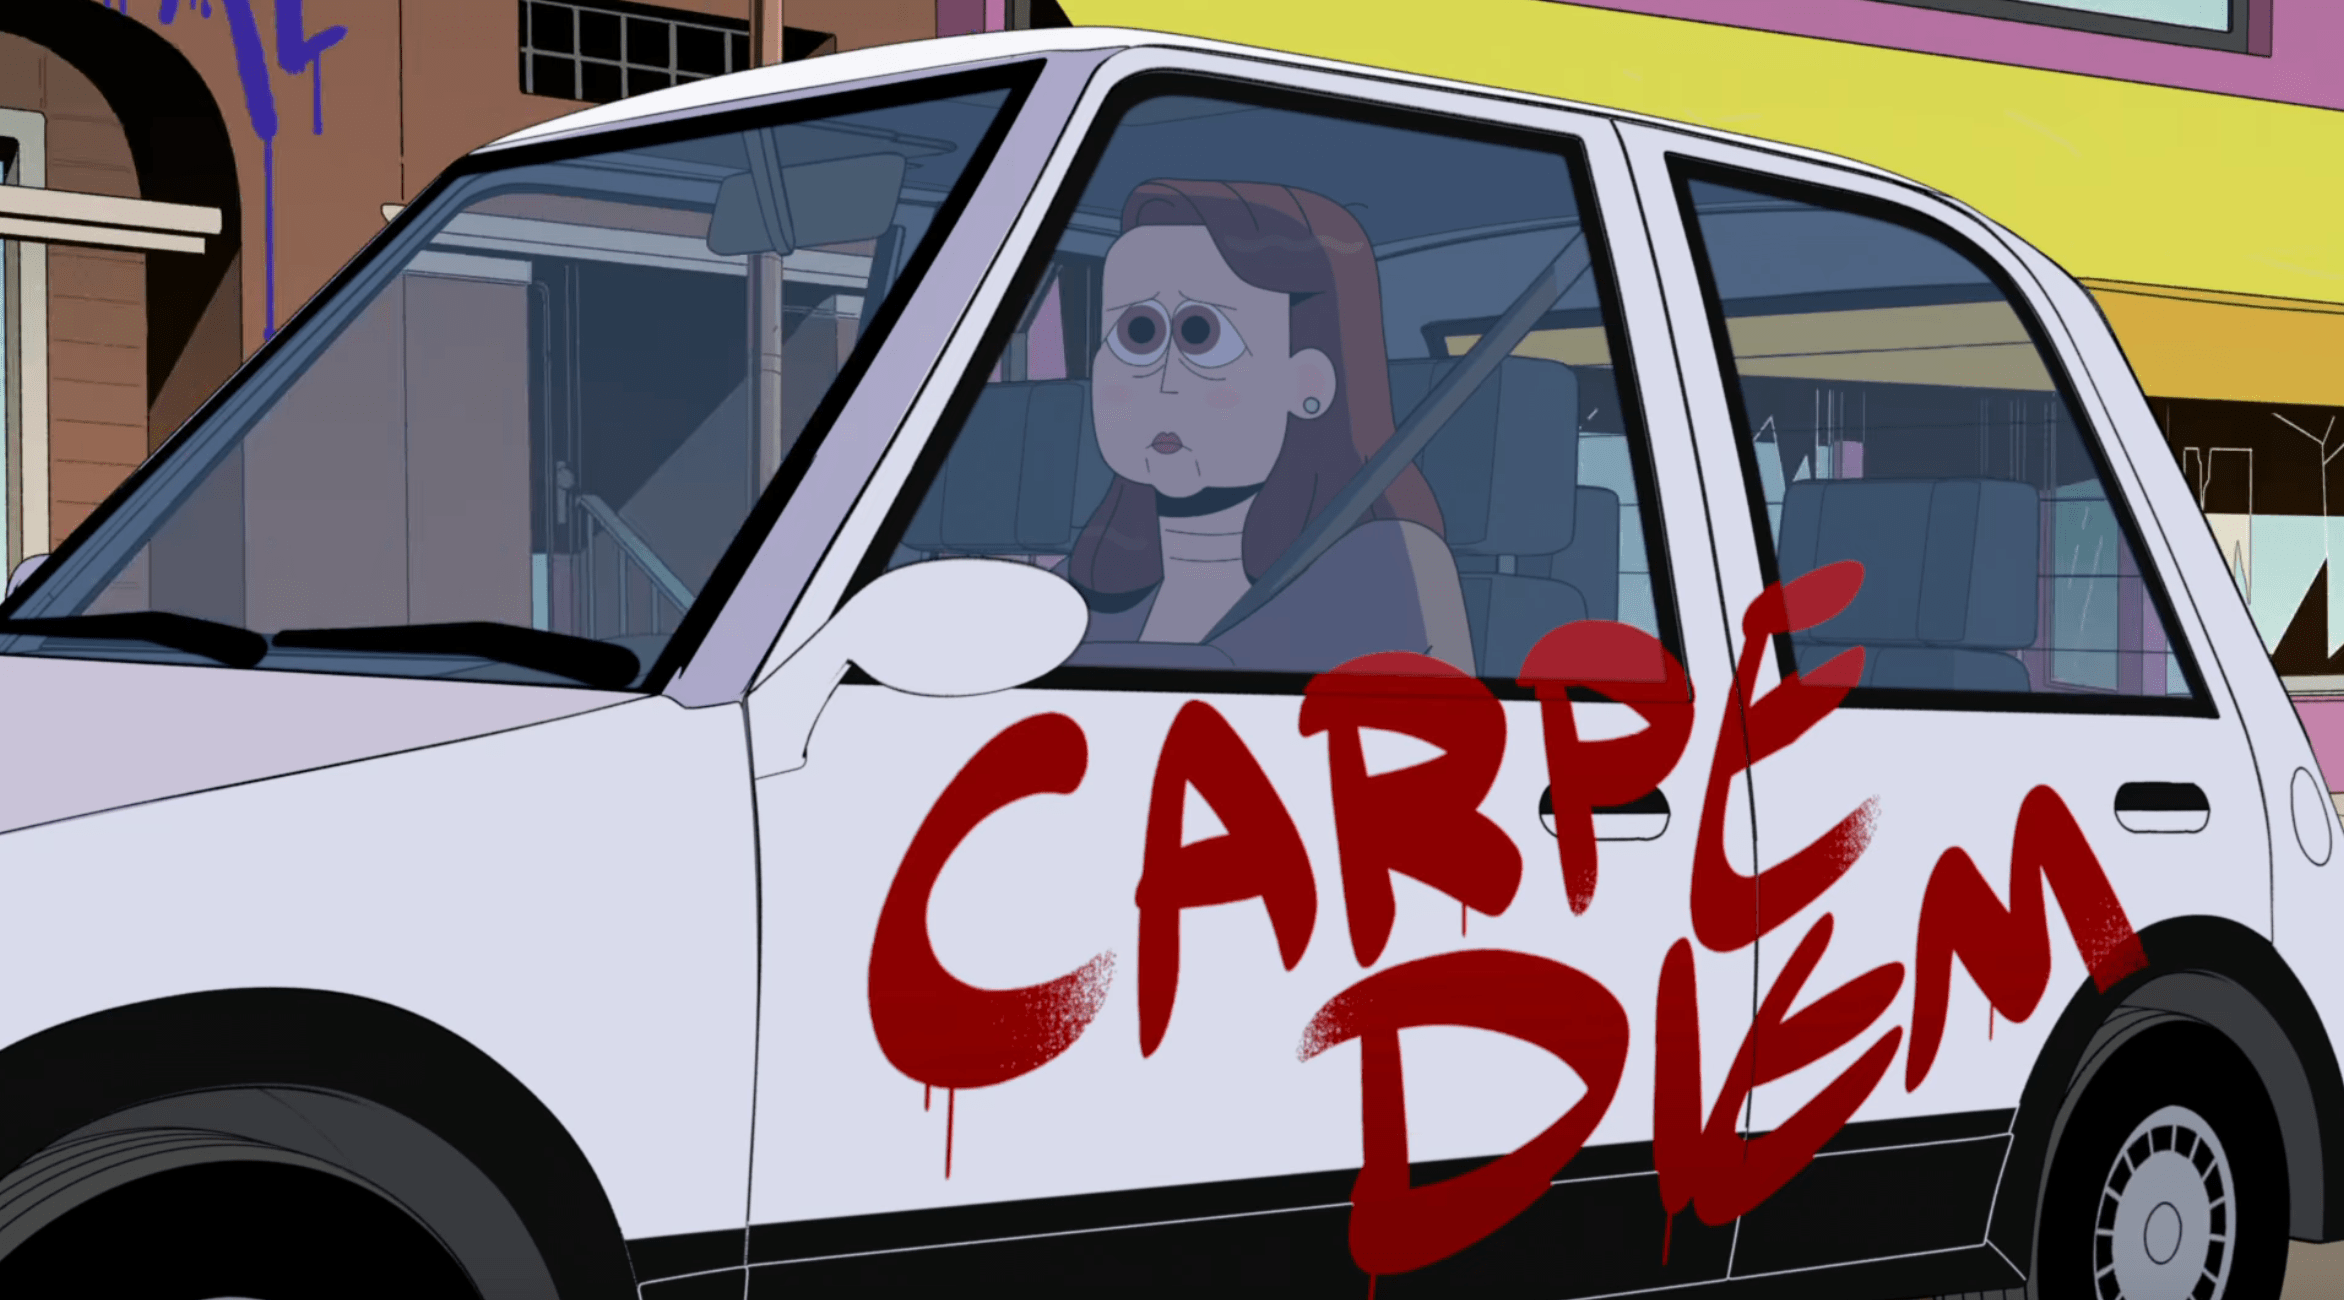 A screenshot from "Carol and the End of the World:" a white woman with brown hair looks sad as she drives a white car with the words "carpe diem" spraypainted in red on the side